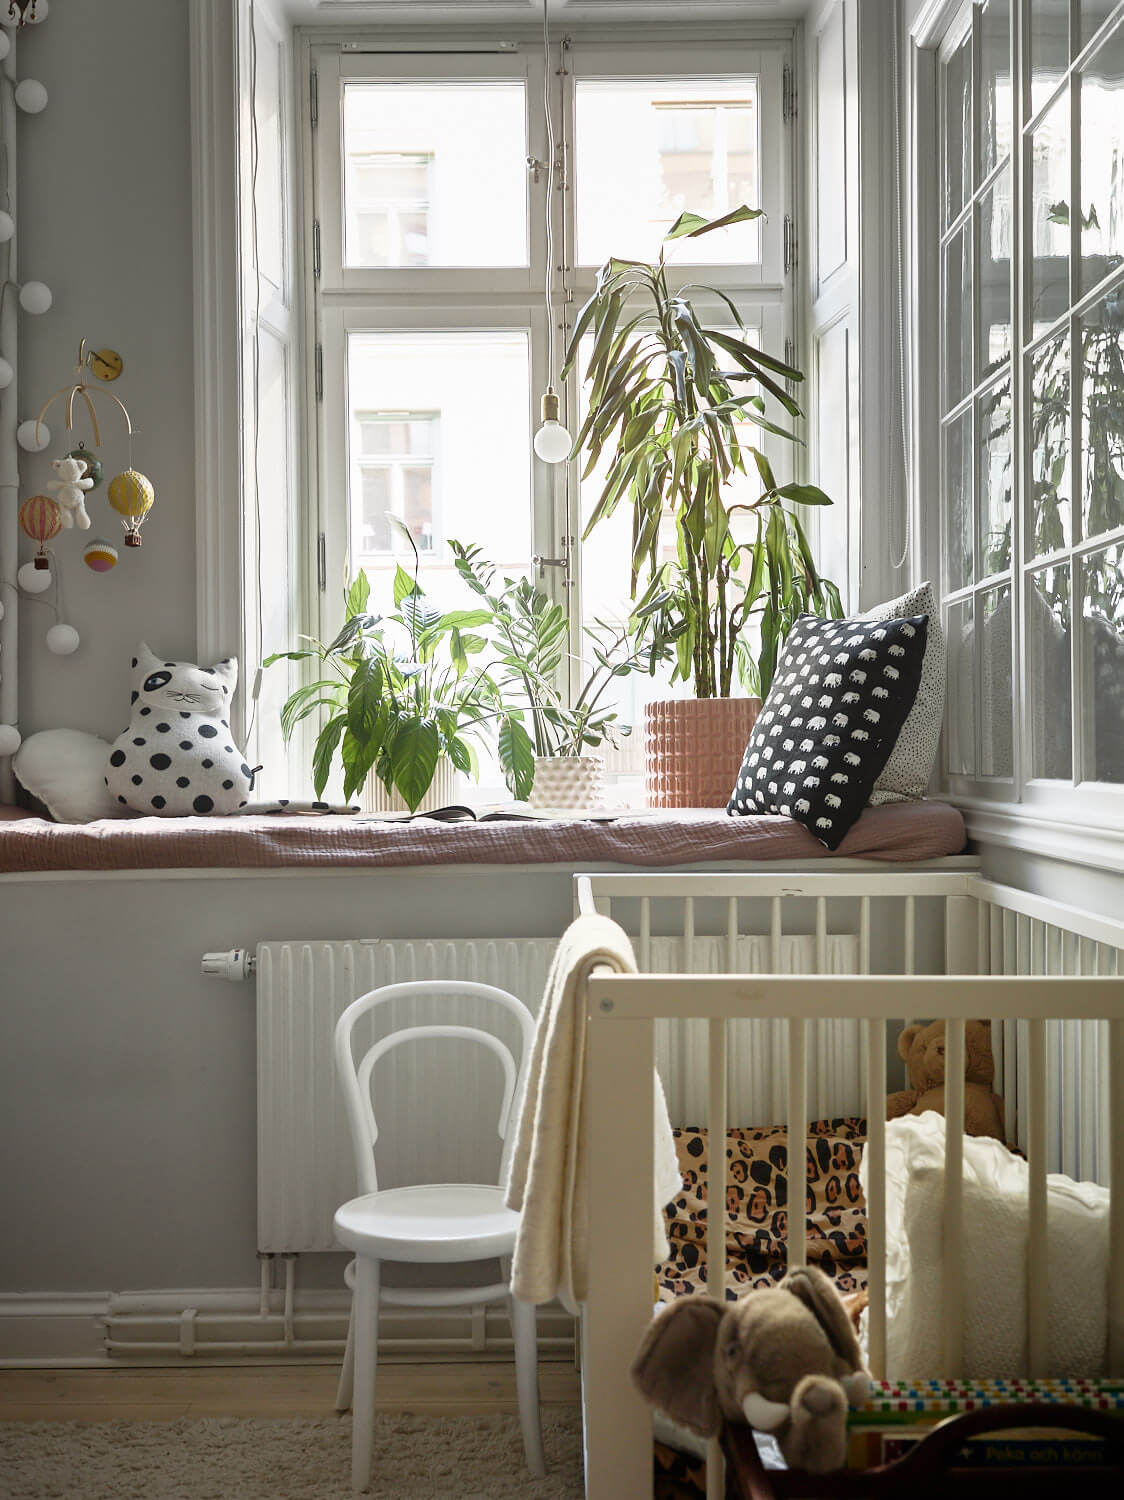 Stockholm family apartment with vintage features